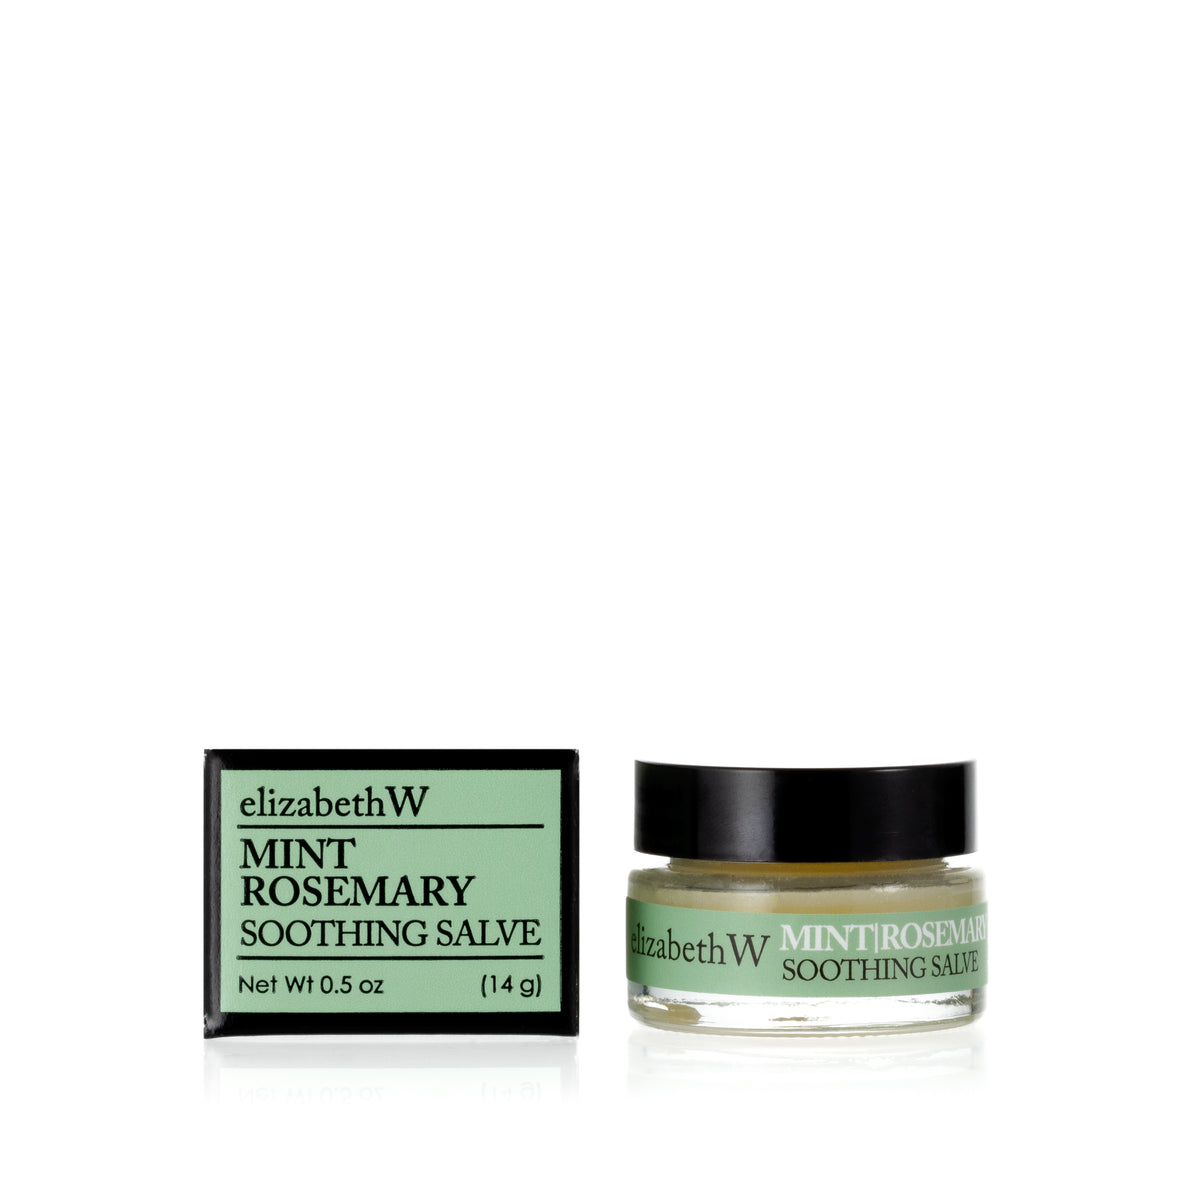 Mint Rosemary Soothing Salve